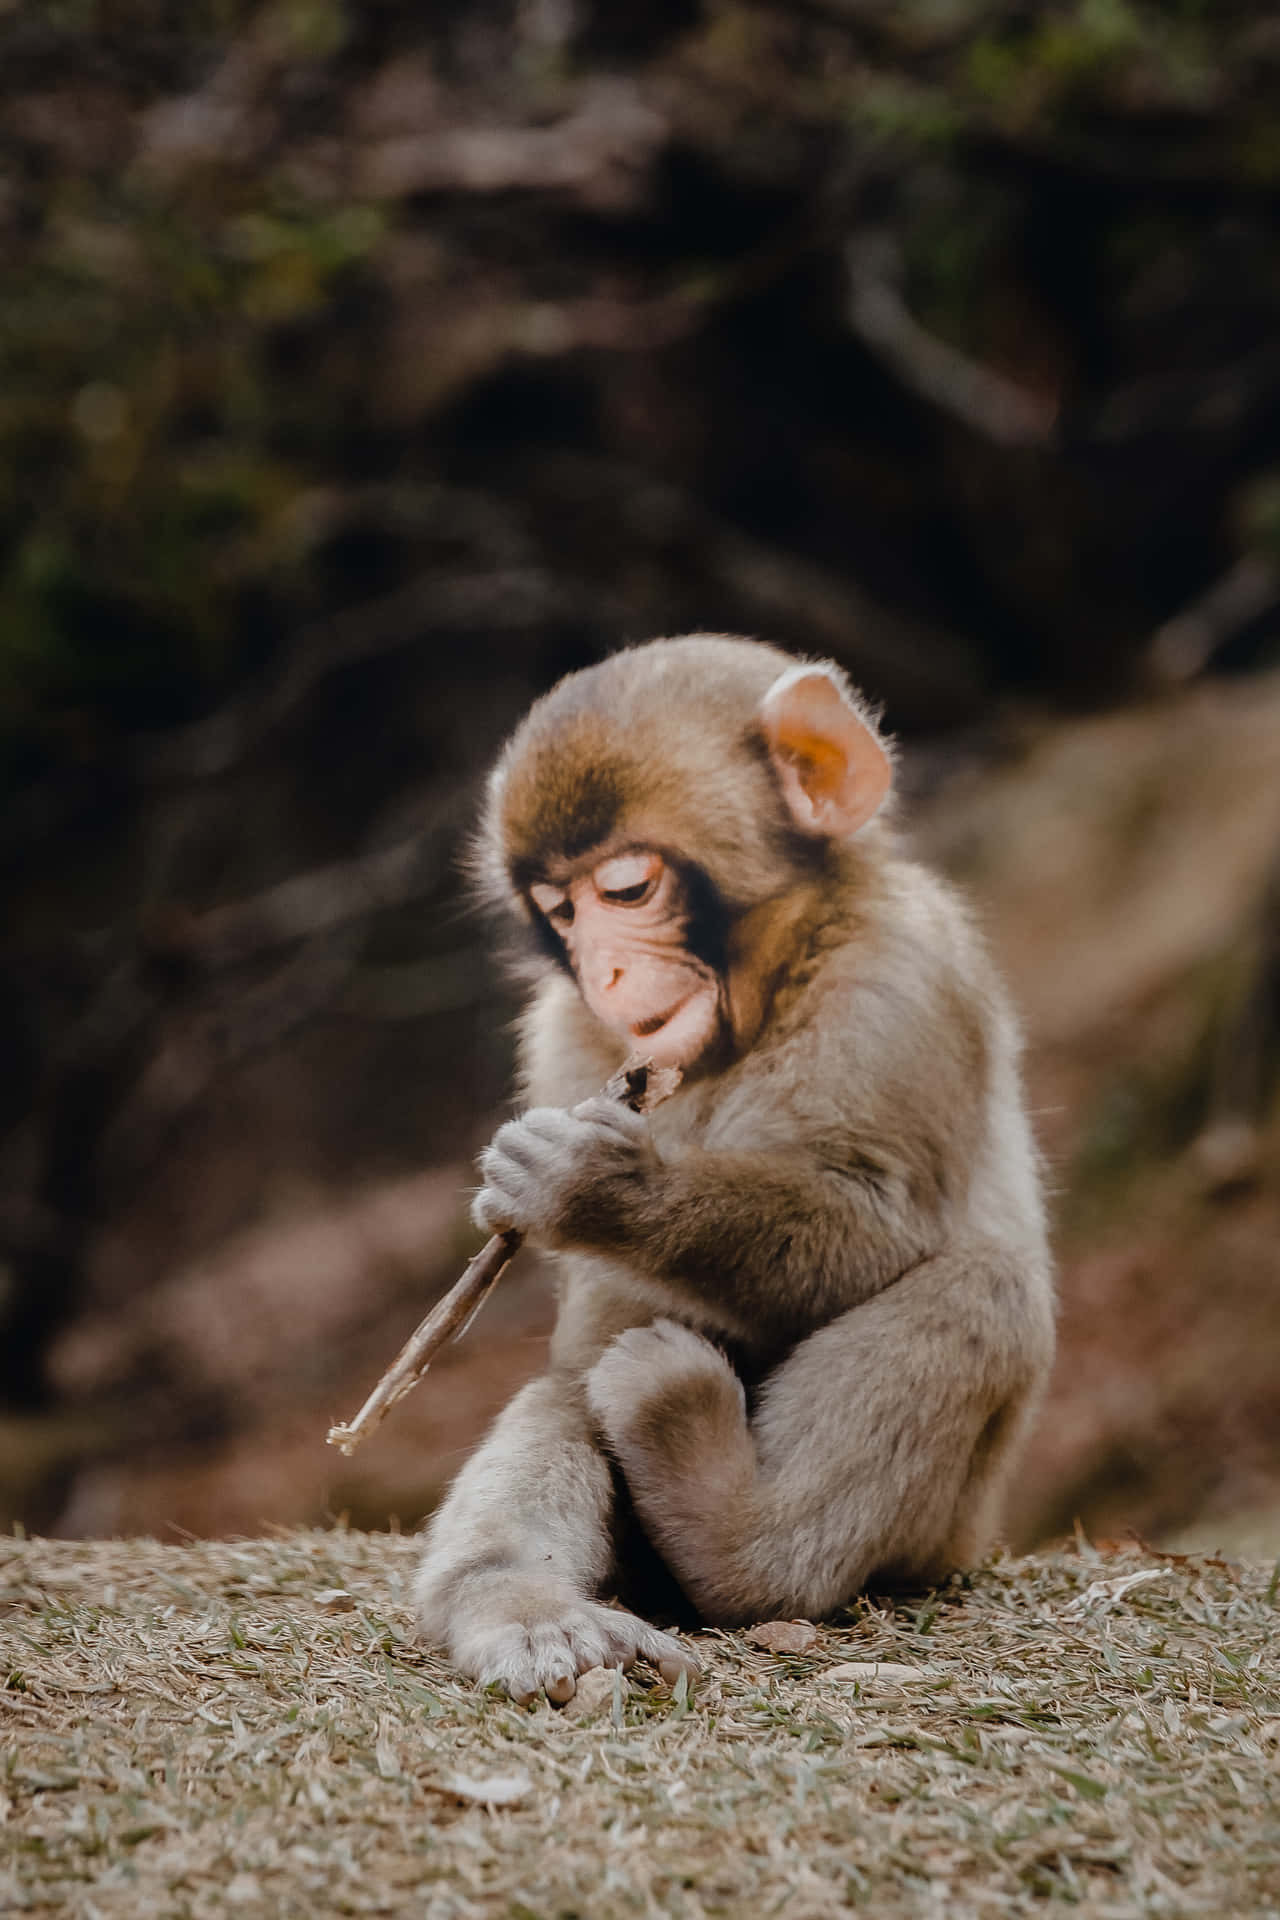 Adorable Monkey Captures the Heart of Everyone Around Him